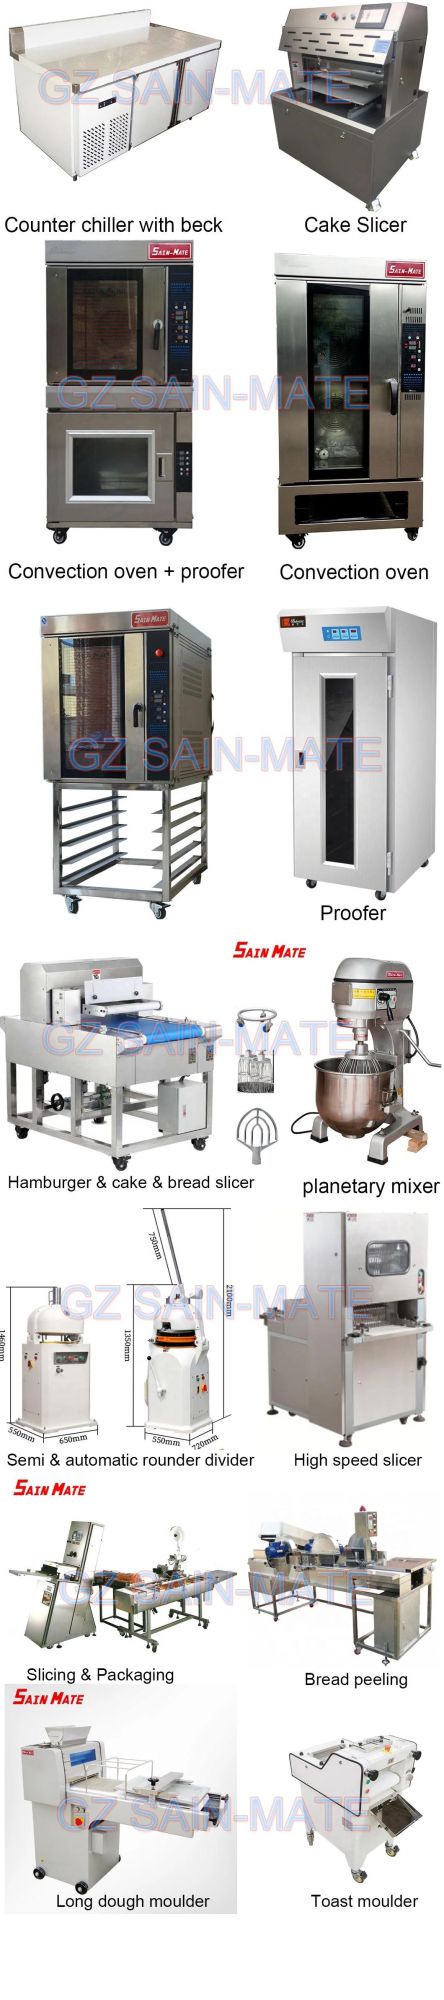 Wholesale Economical Baking Pastry 16 Trays Diesel Rotary Rack Oven Spares, 16 Tray Rotary Rack Oven